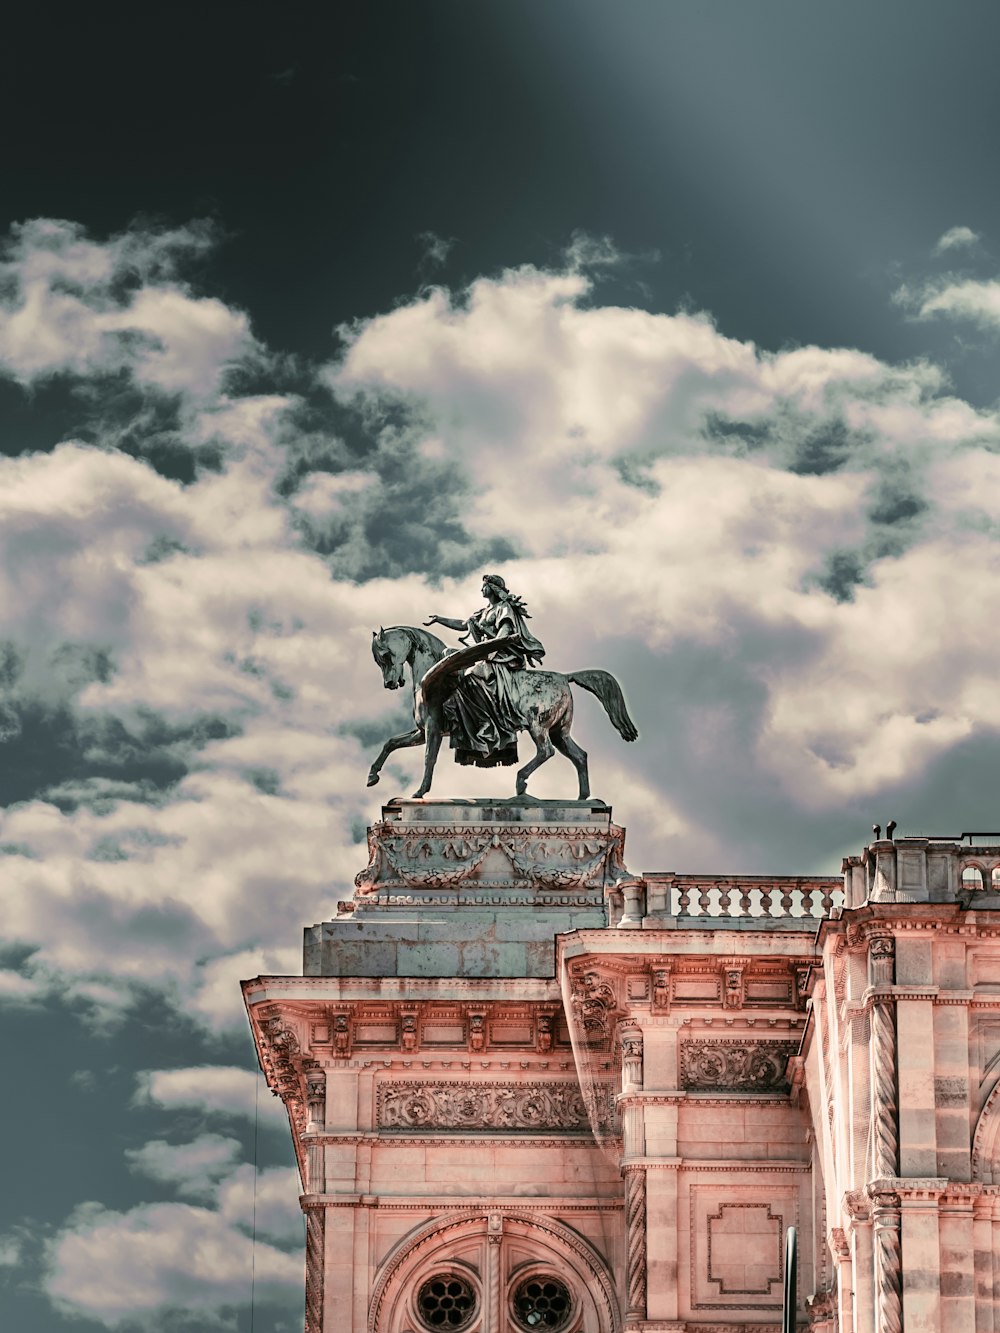 man riding horse statue under cloudy sky during daytime